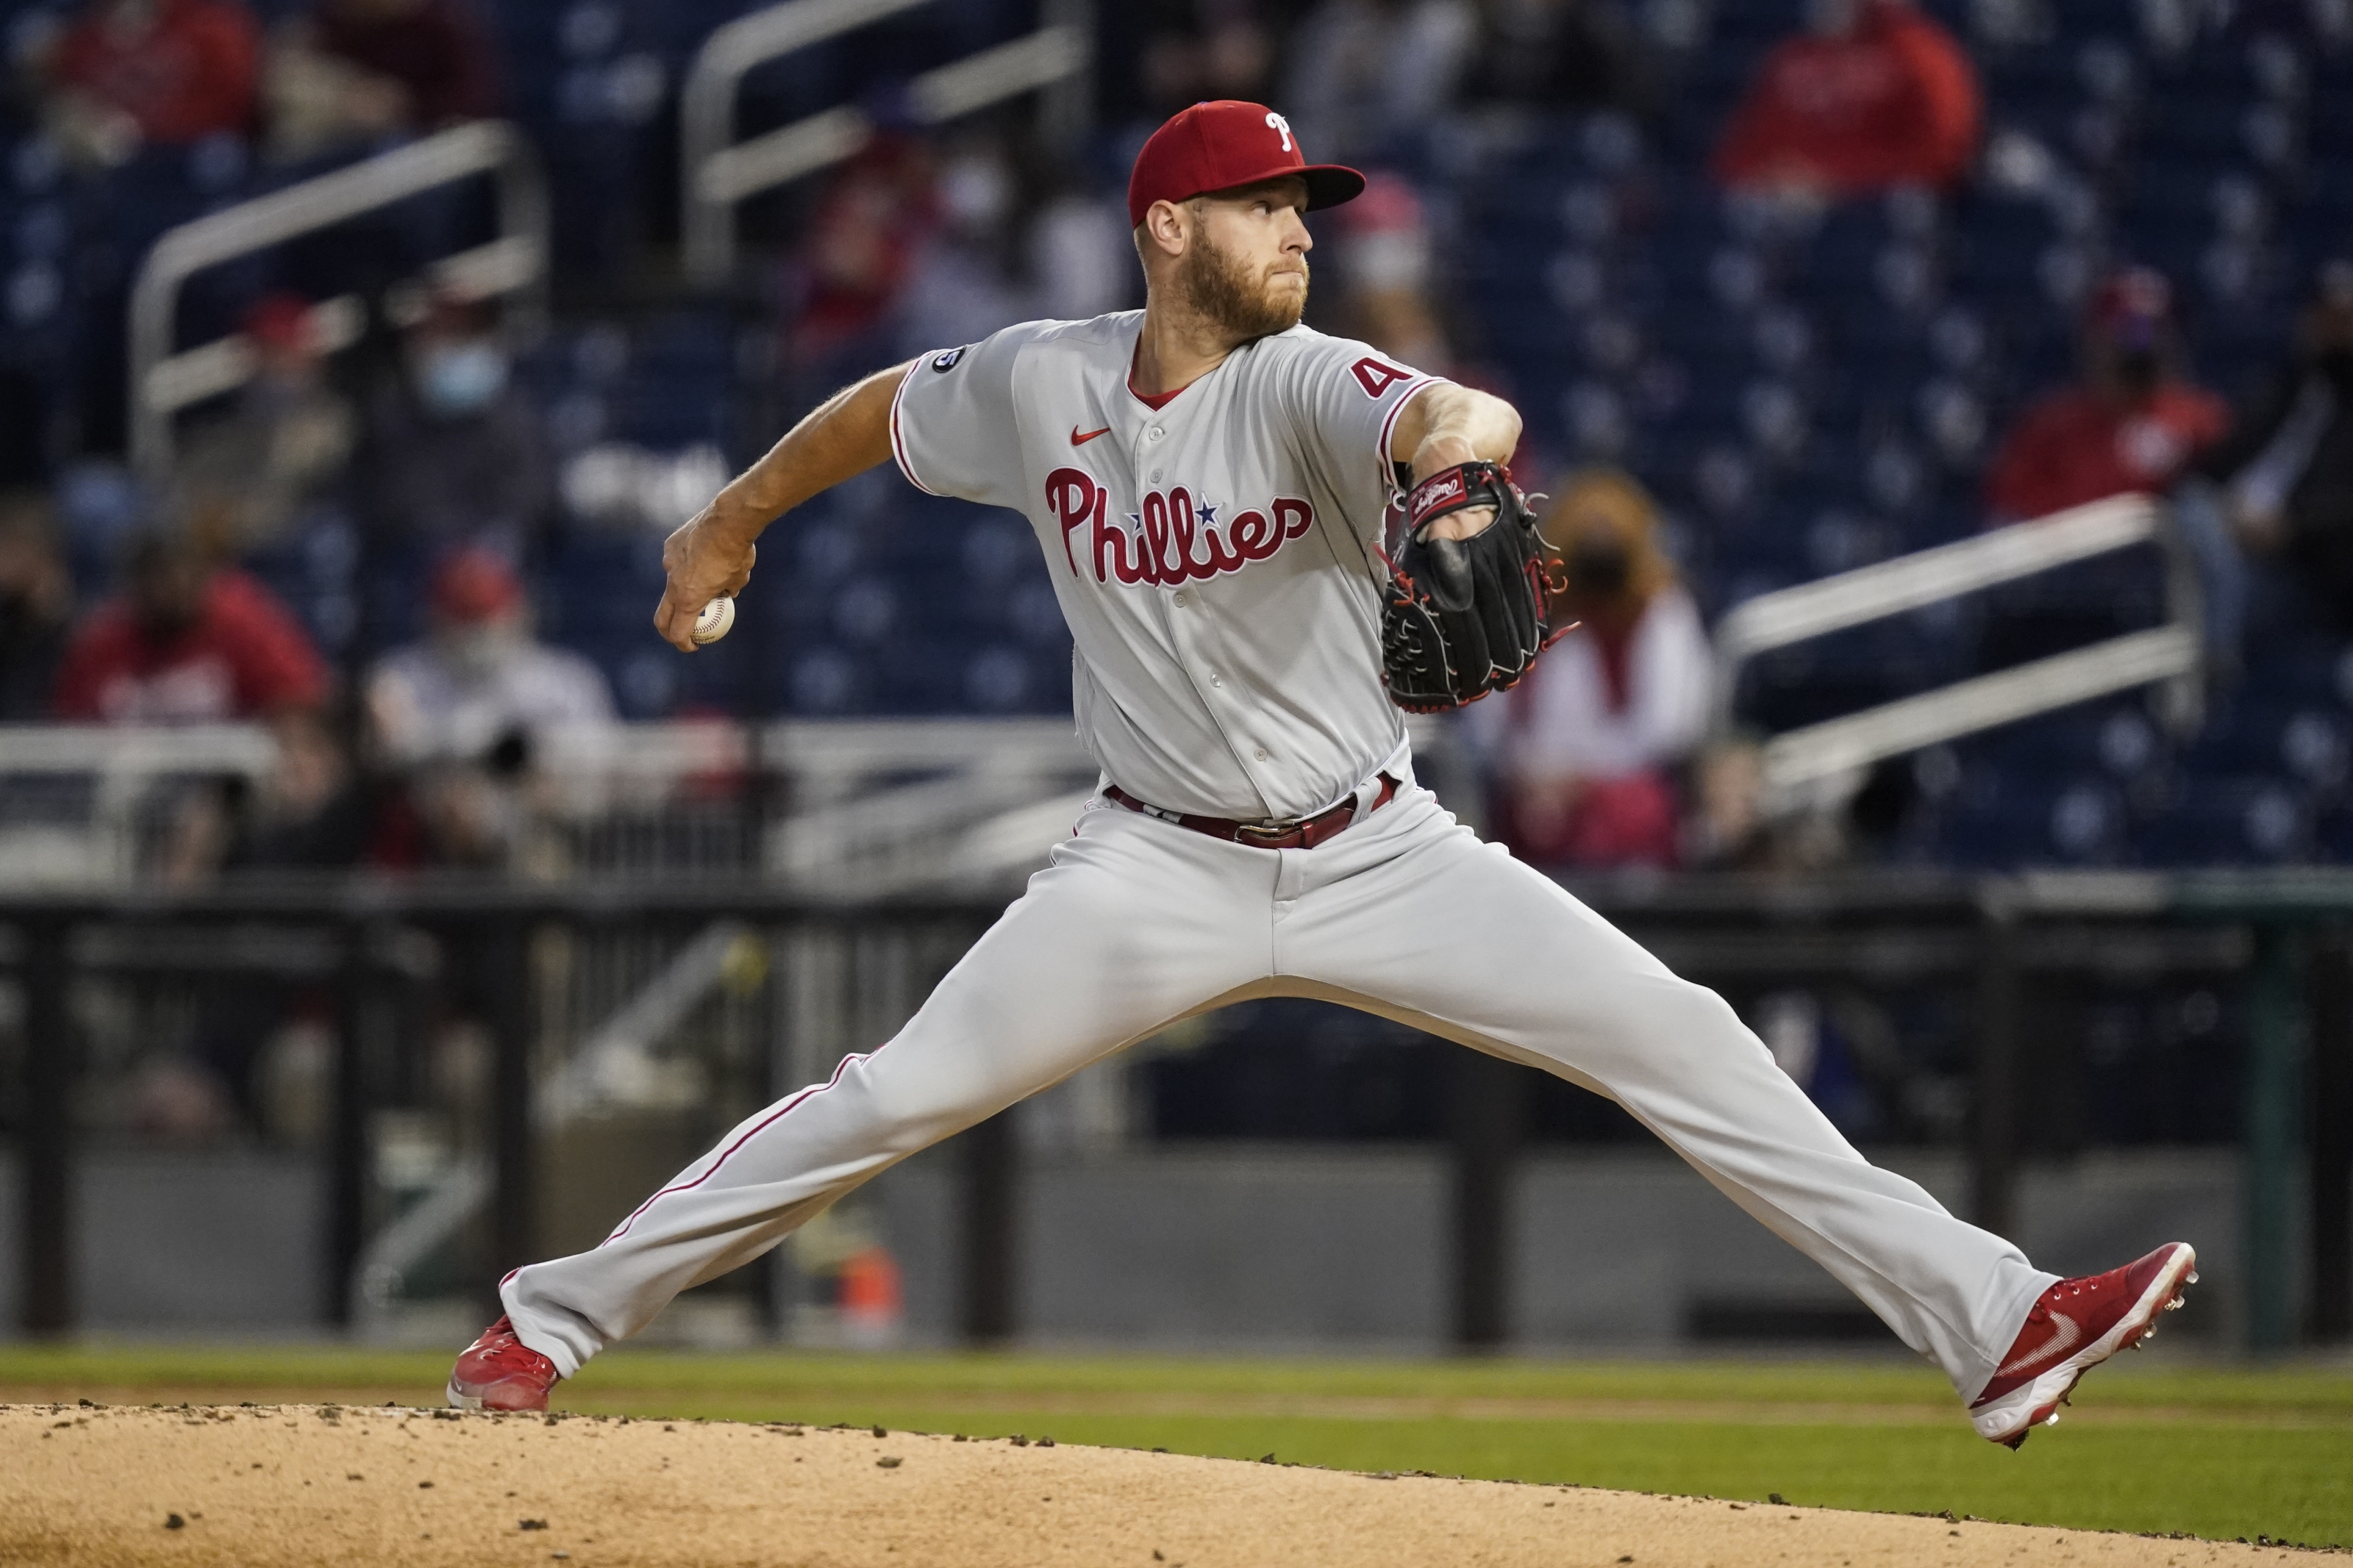 Nats look to even the series in Game 2 at Phillies